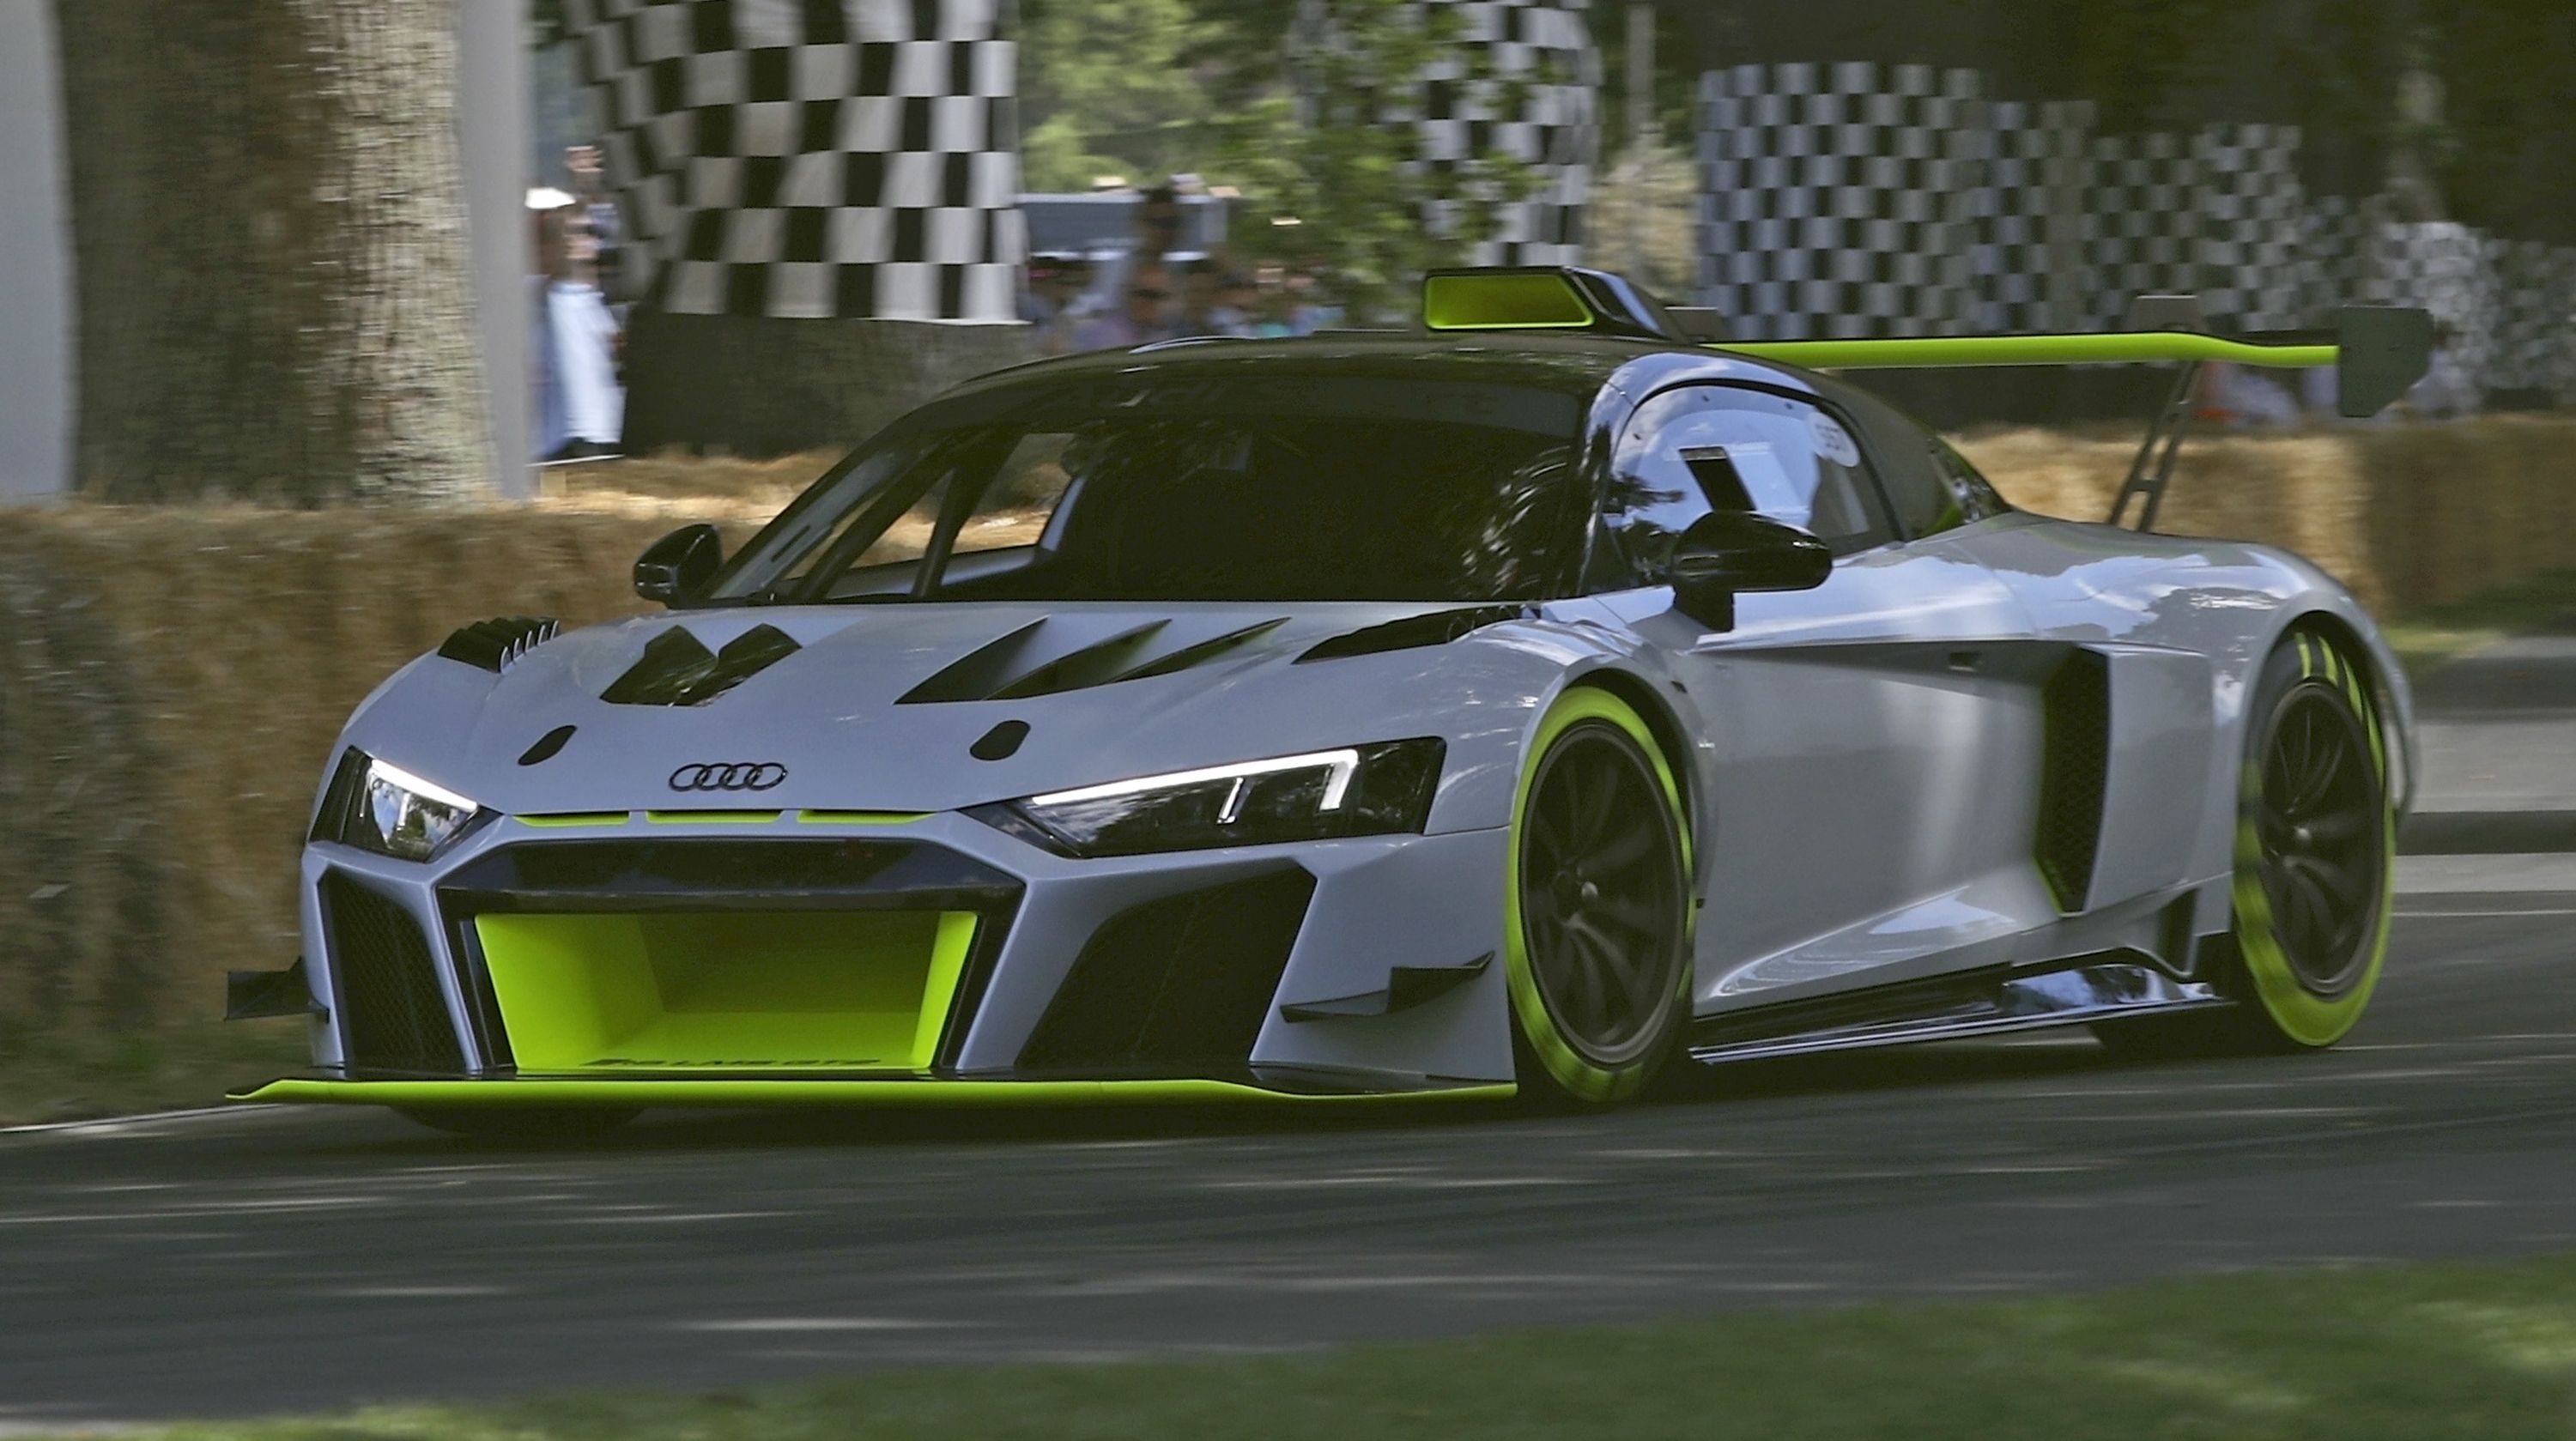 The Audi R8 Lms Gt2 Is We Deserve For Road But Can